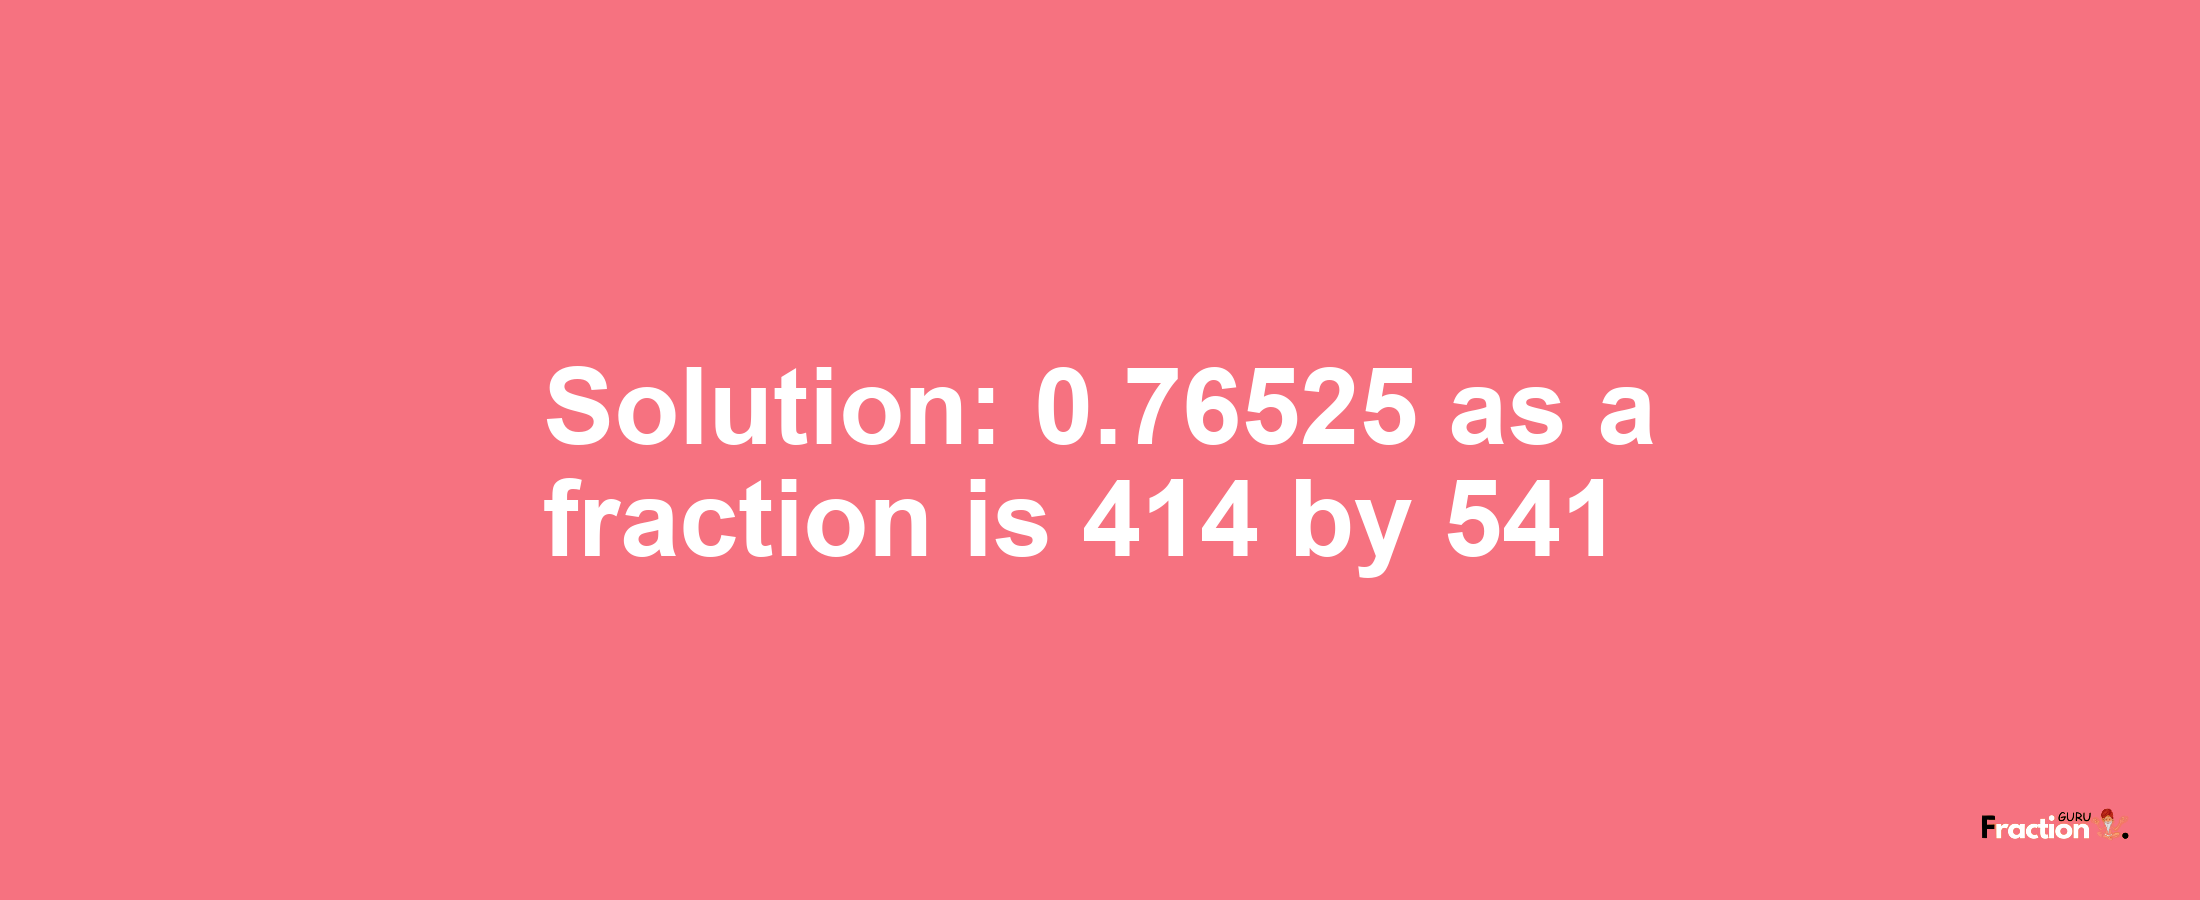 Solution:0.76525 as a fraction is 414/541